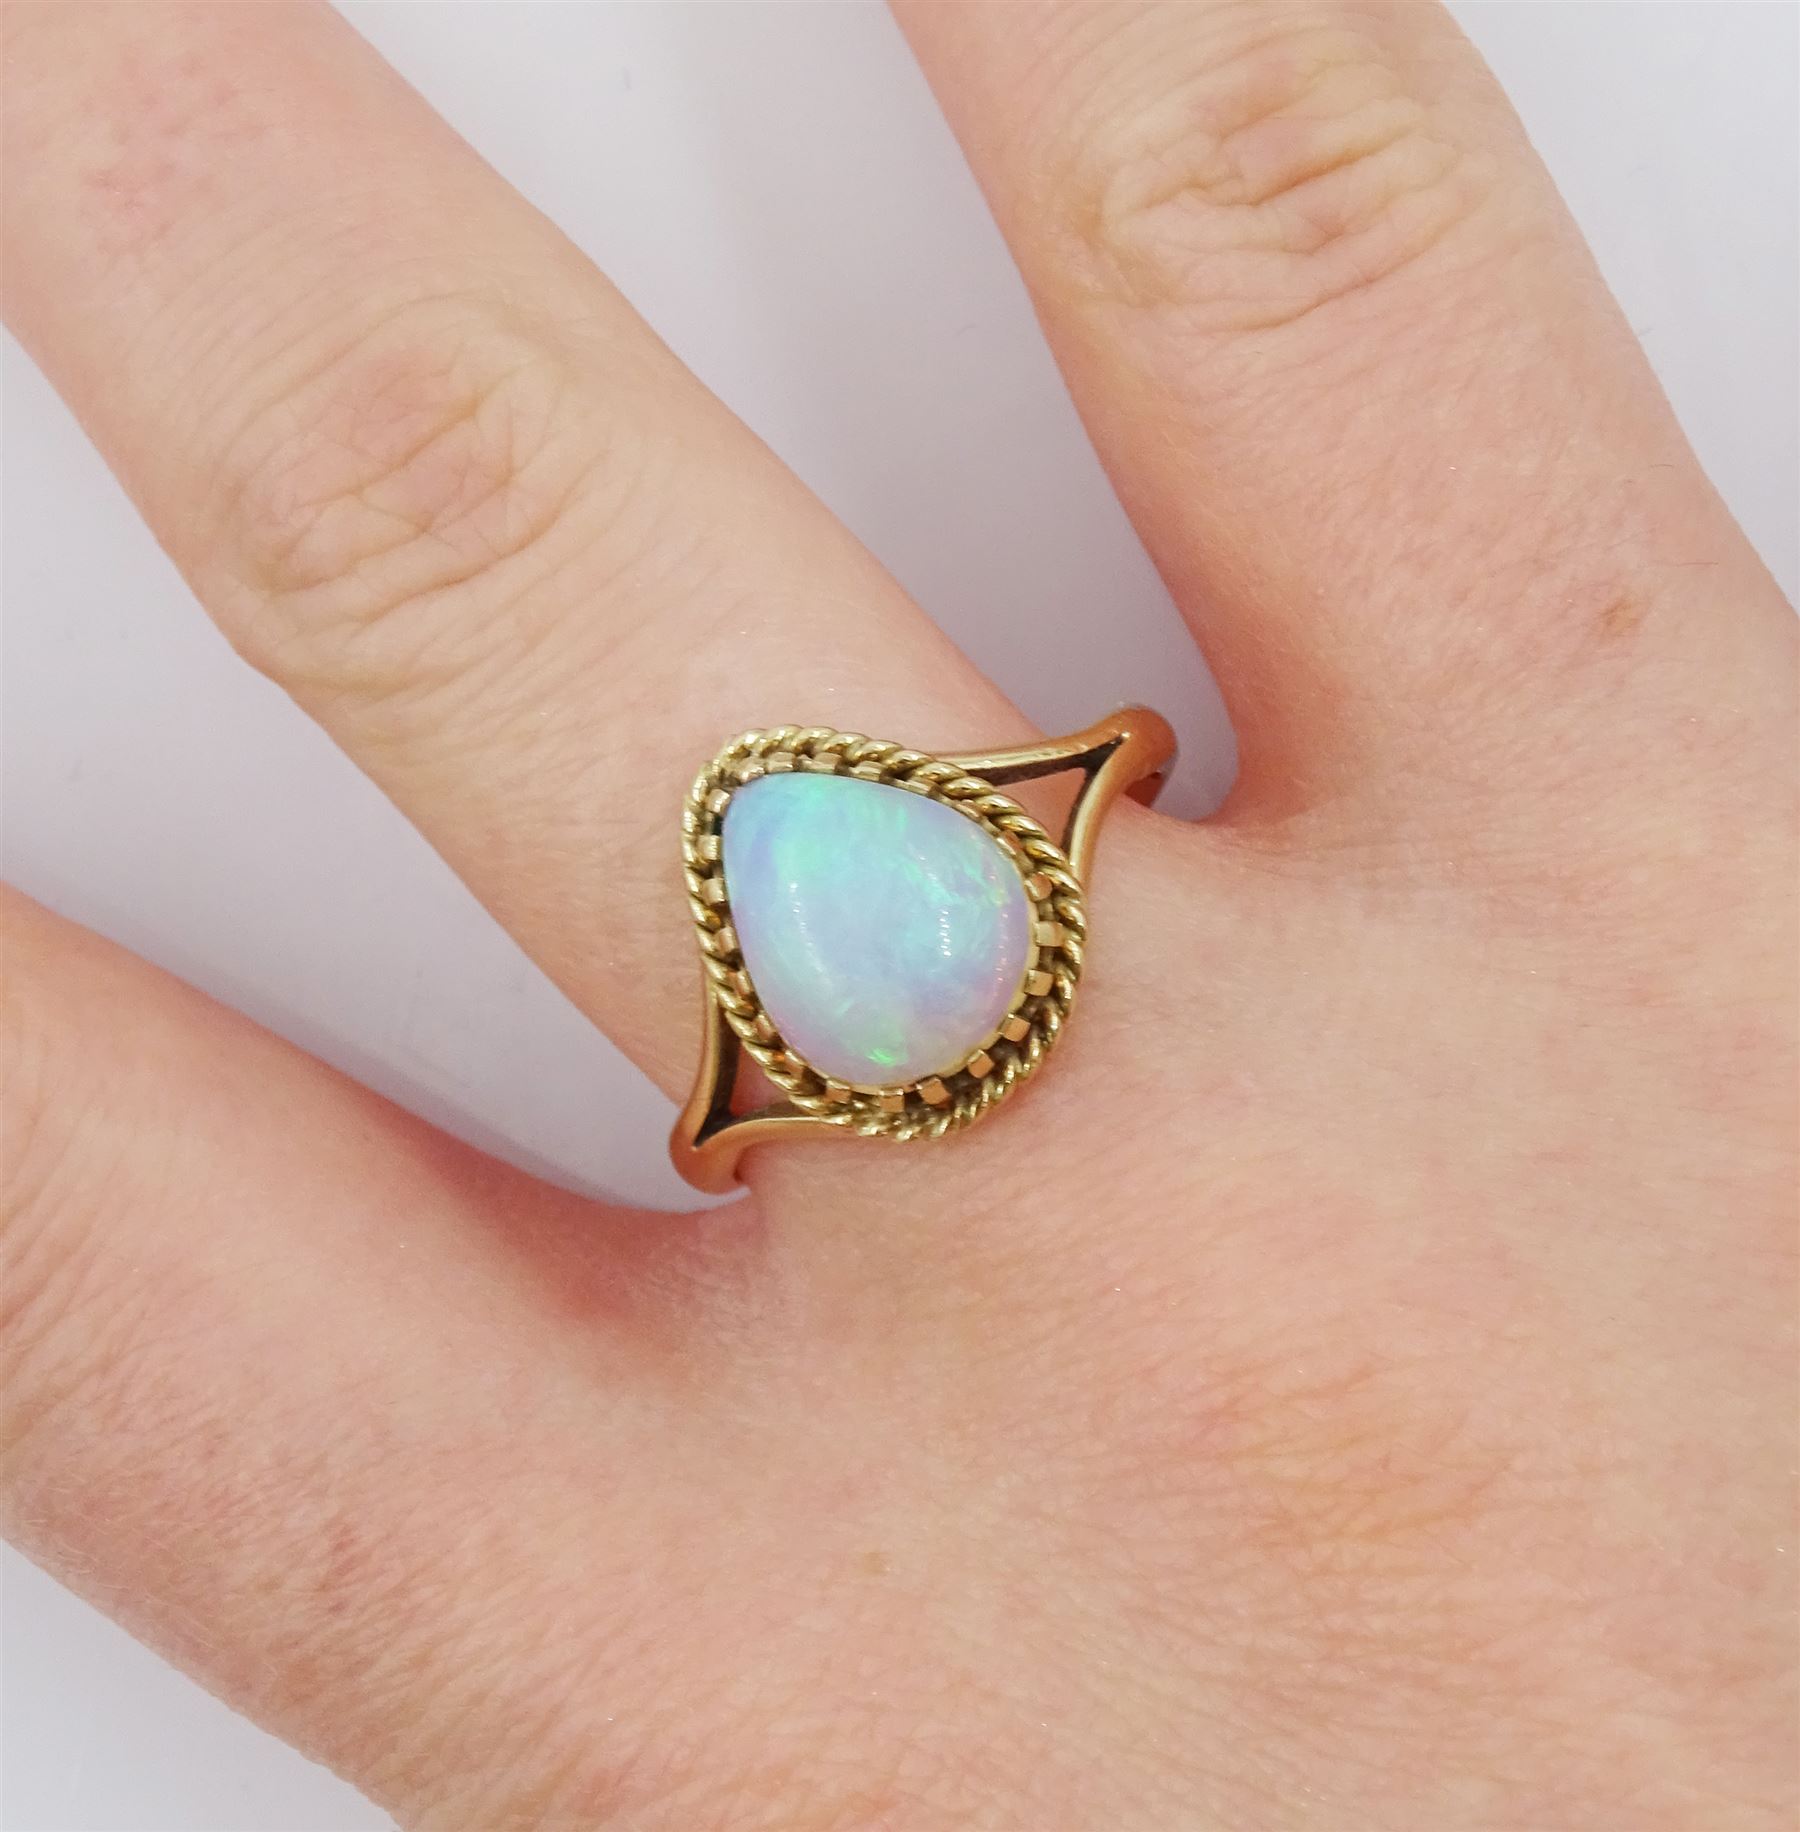 9ct gold single stone pear cut opal ring - Image 2 of 5